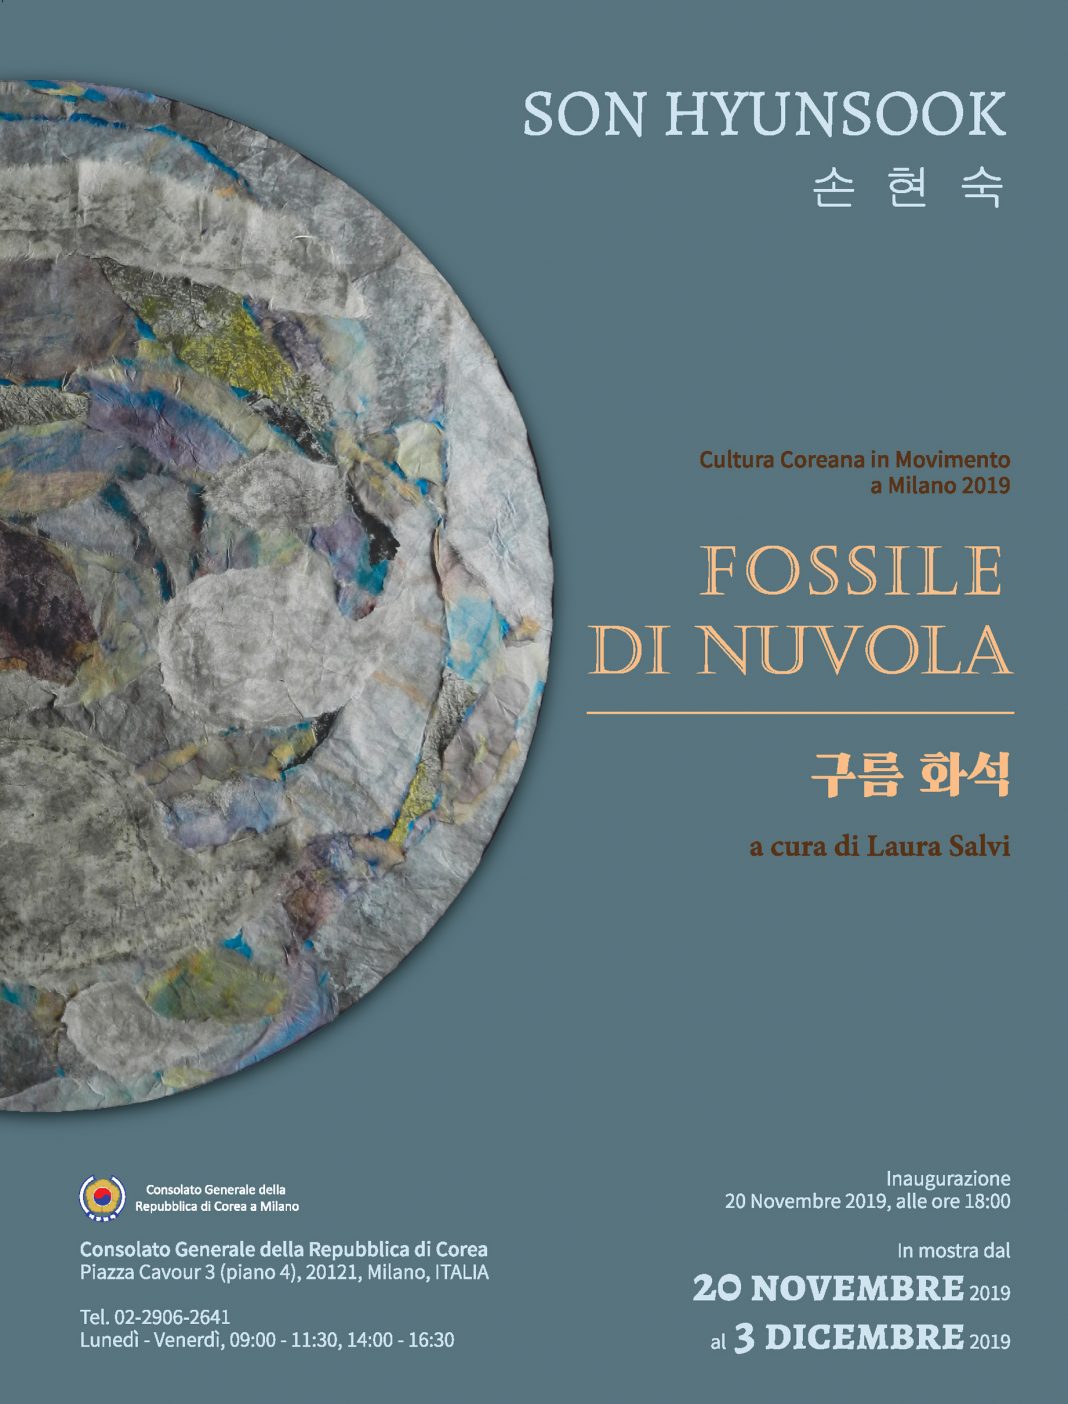 Son Hyun Sook – Fossile di Nuvolahttps://www.exibart.com/repository/media/formidable/11/poster-1068x1404.jpg